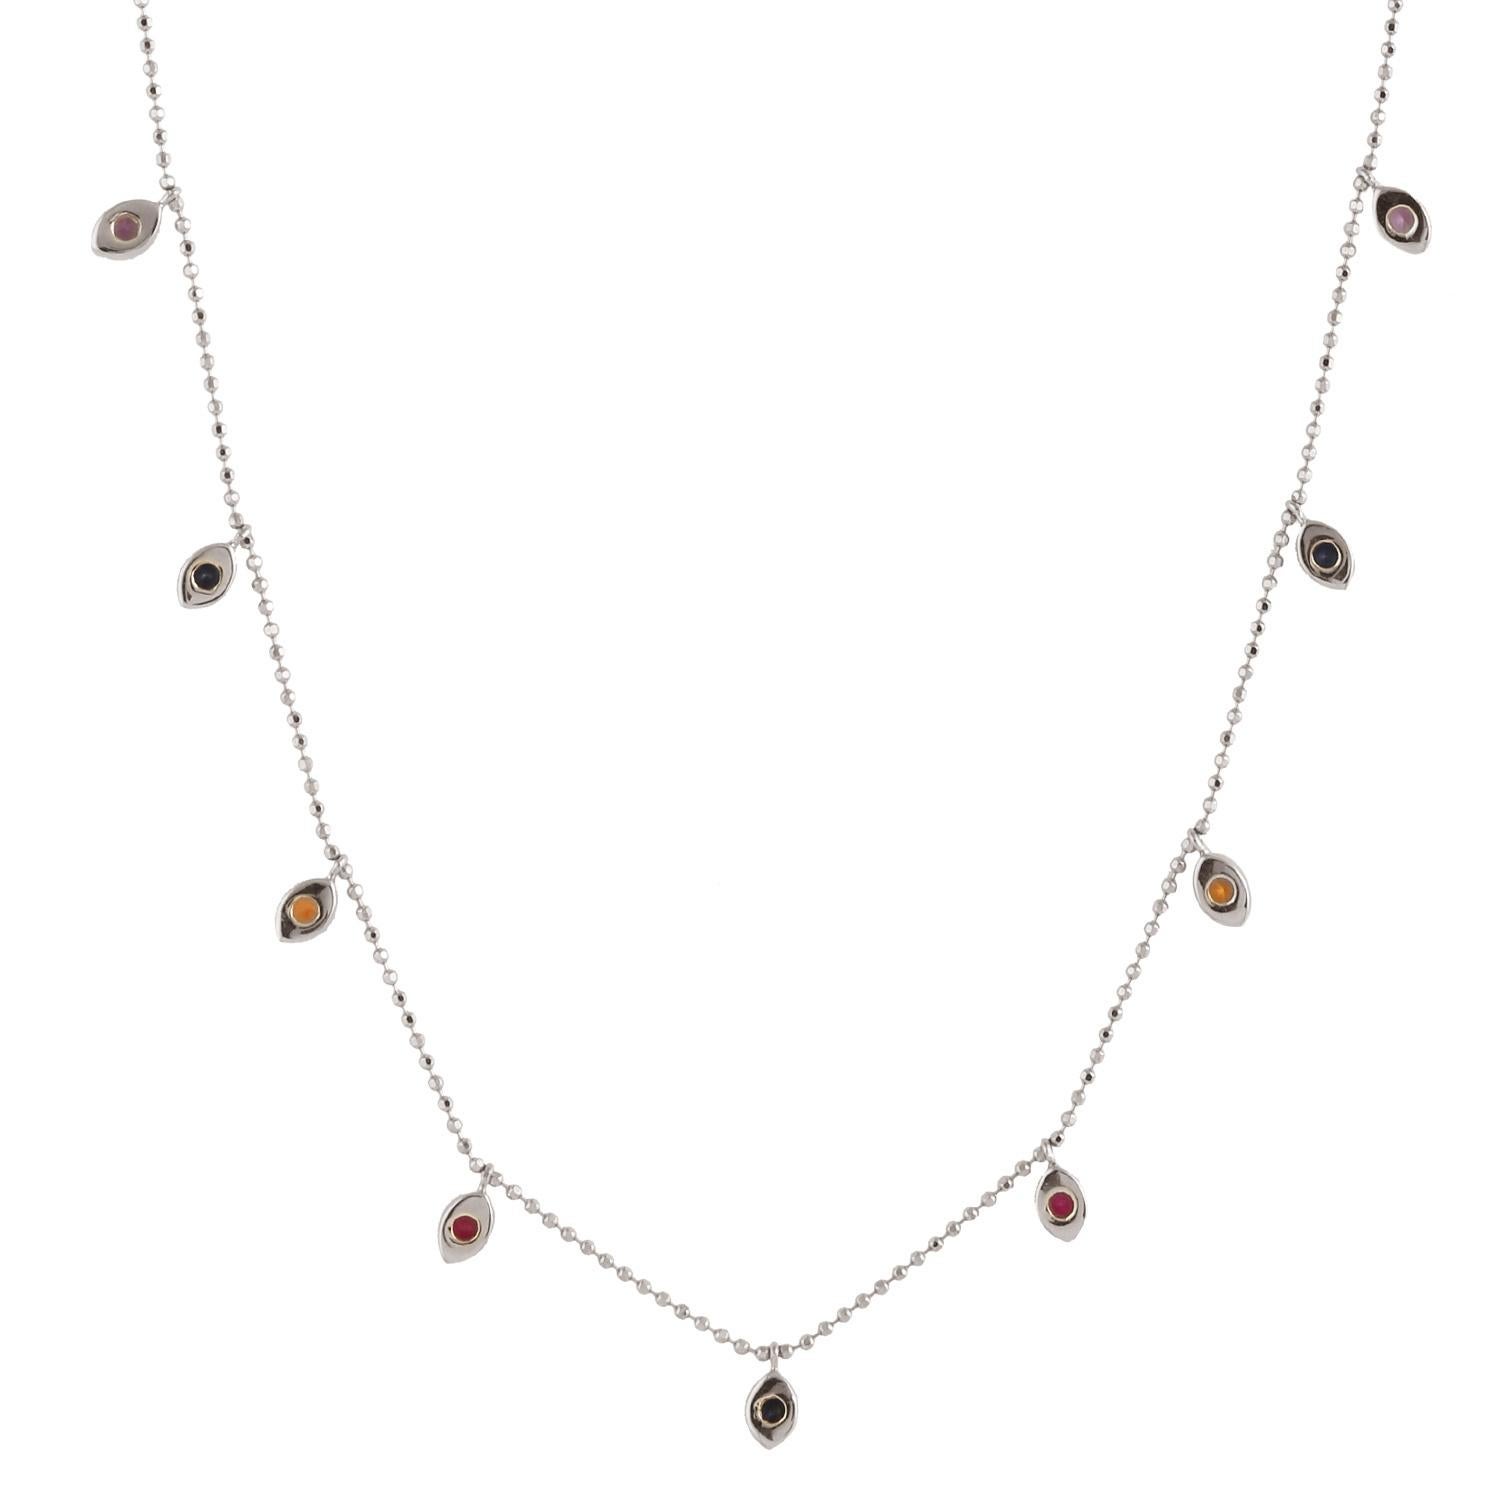 Mixed Cut Multi Colored Sapphire Chain Necklace Made In 18k White Gold For Sale